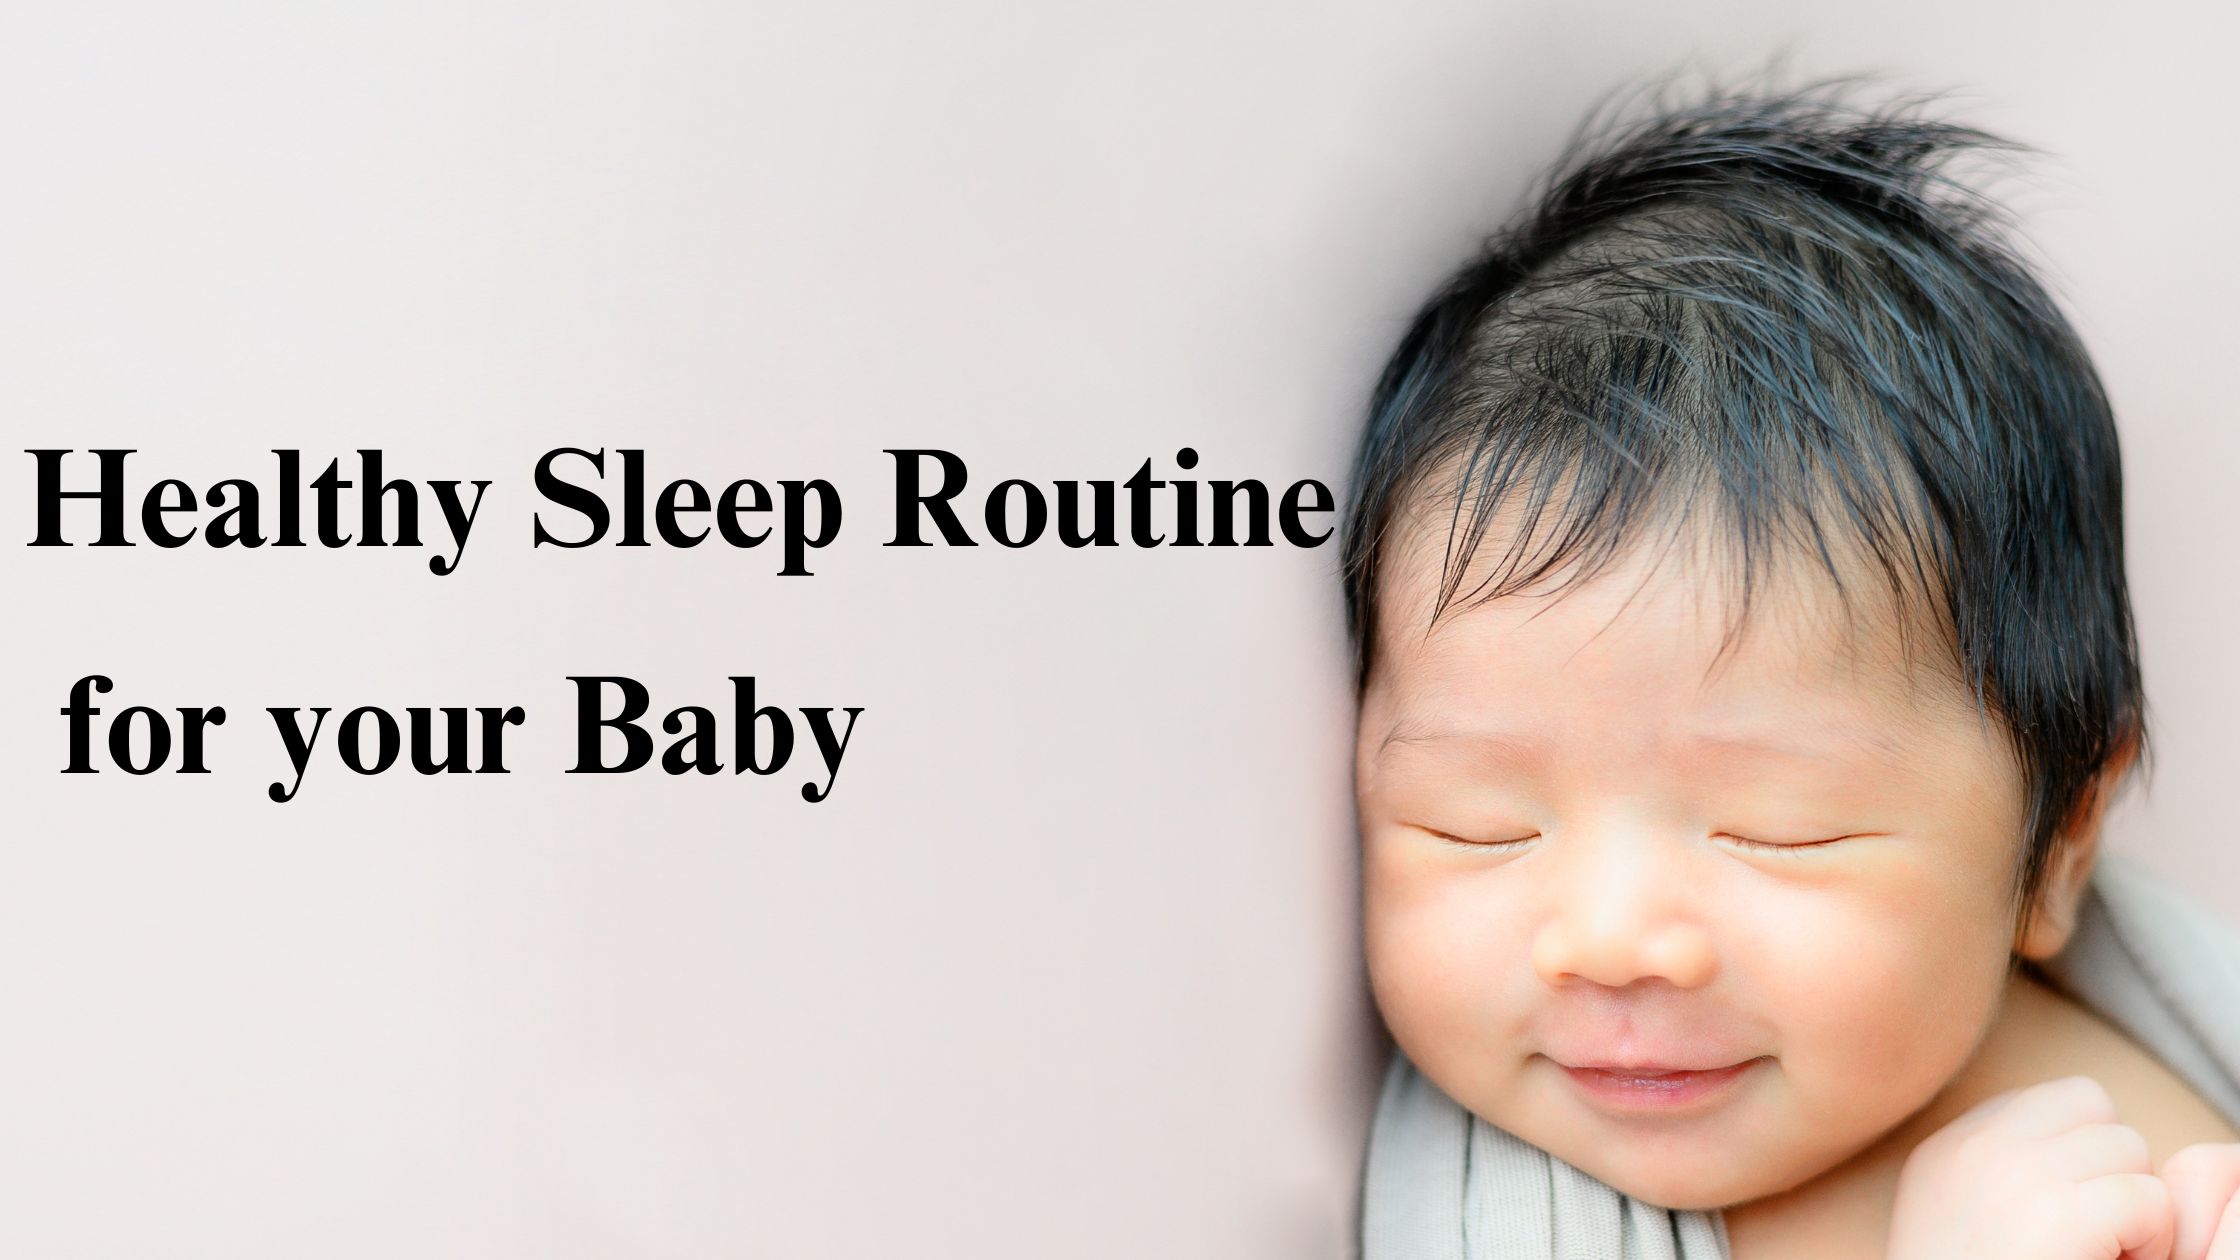 Healthy Sleep Routine for Your Baby or Toddler